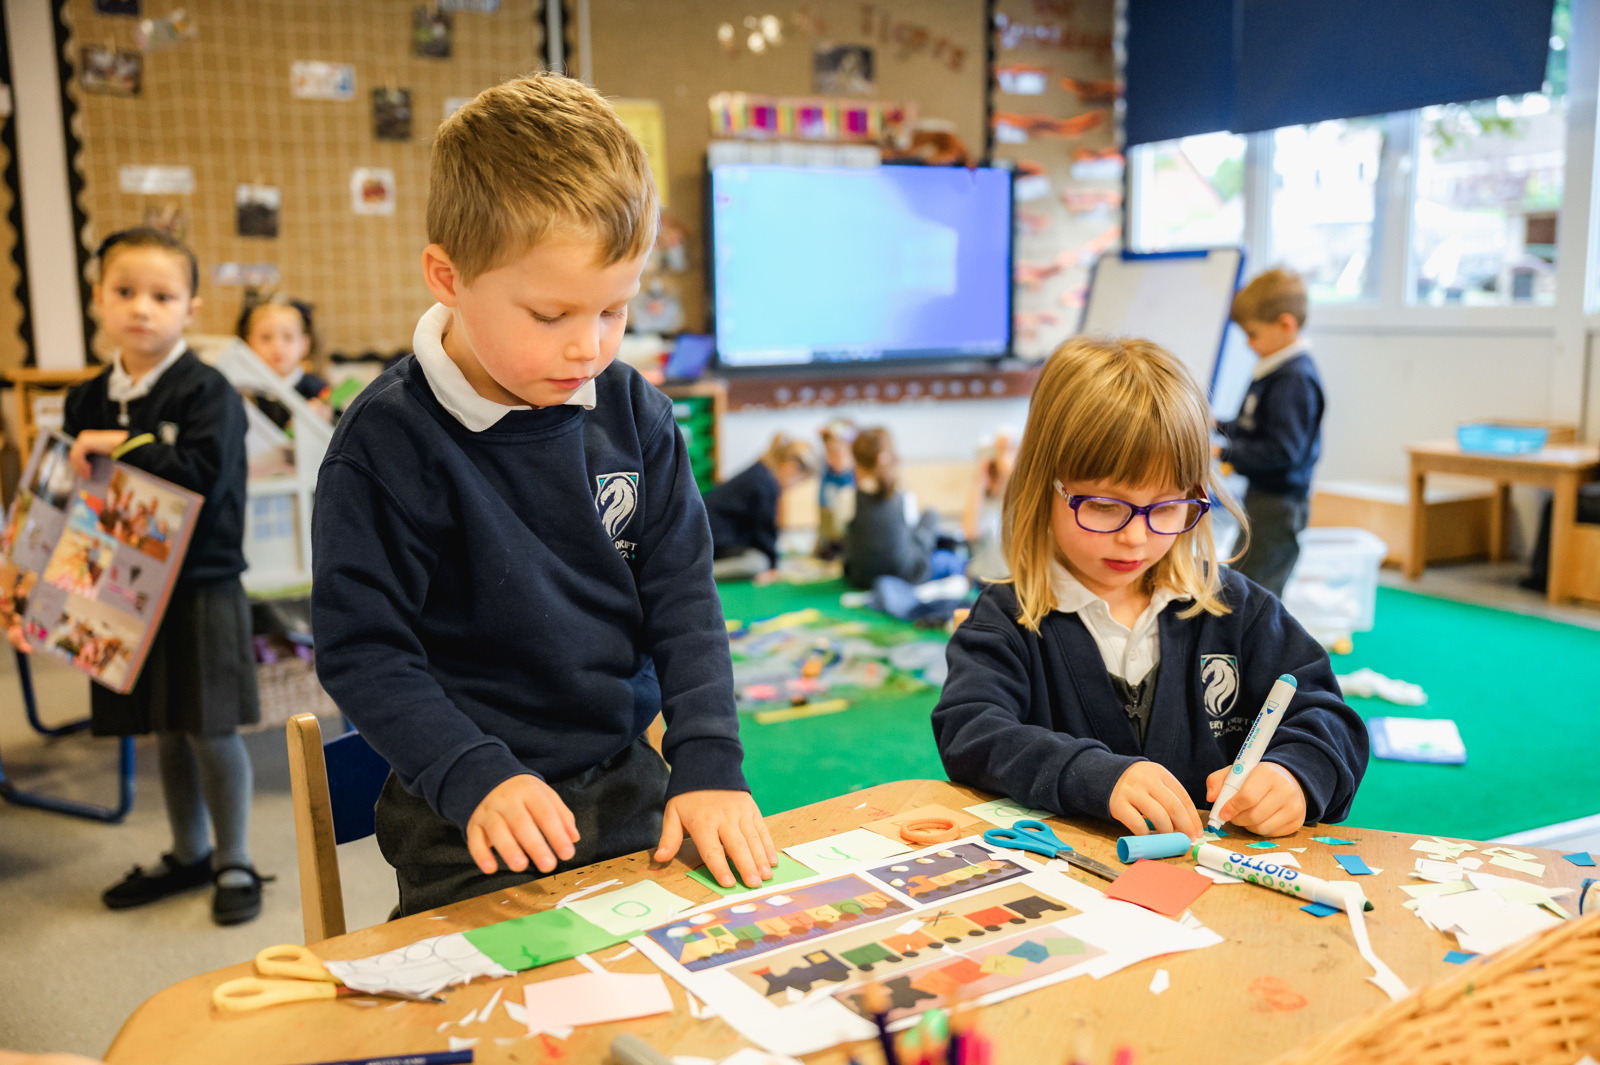 A boy and girl are engaged in activity at the mark making table